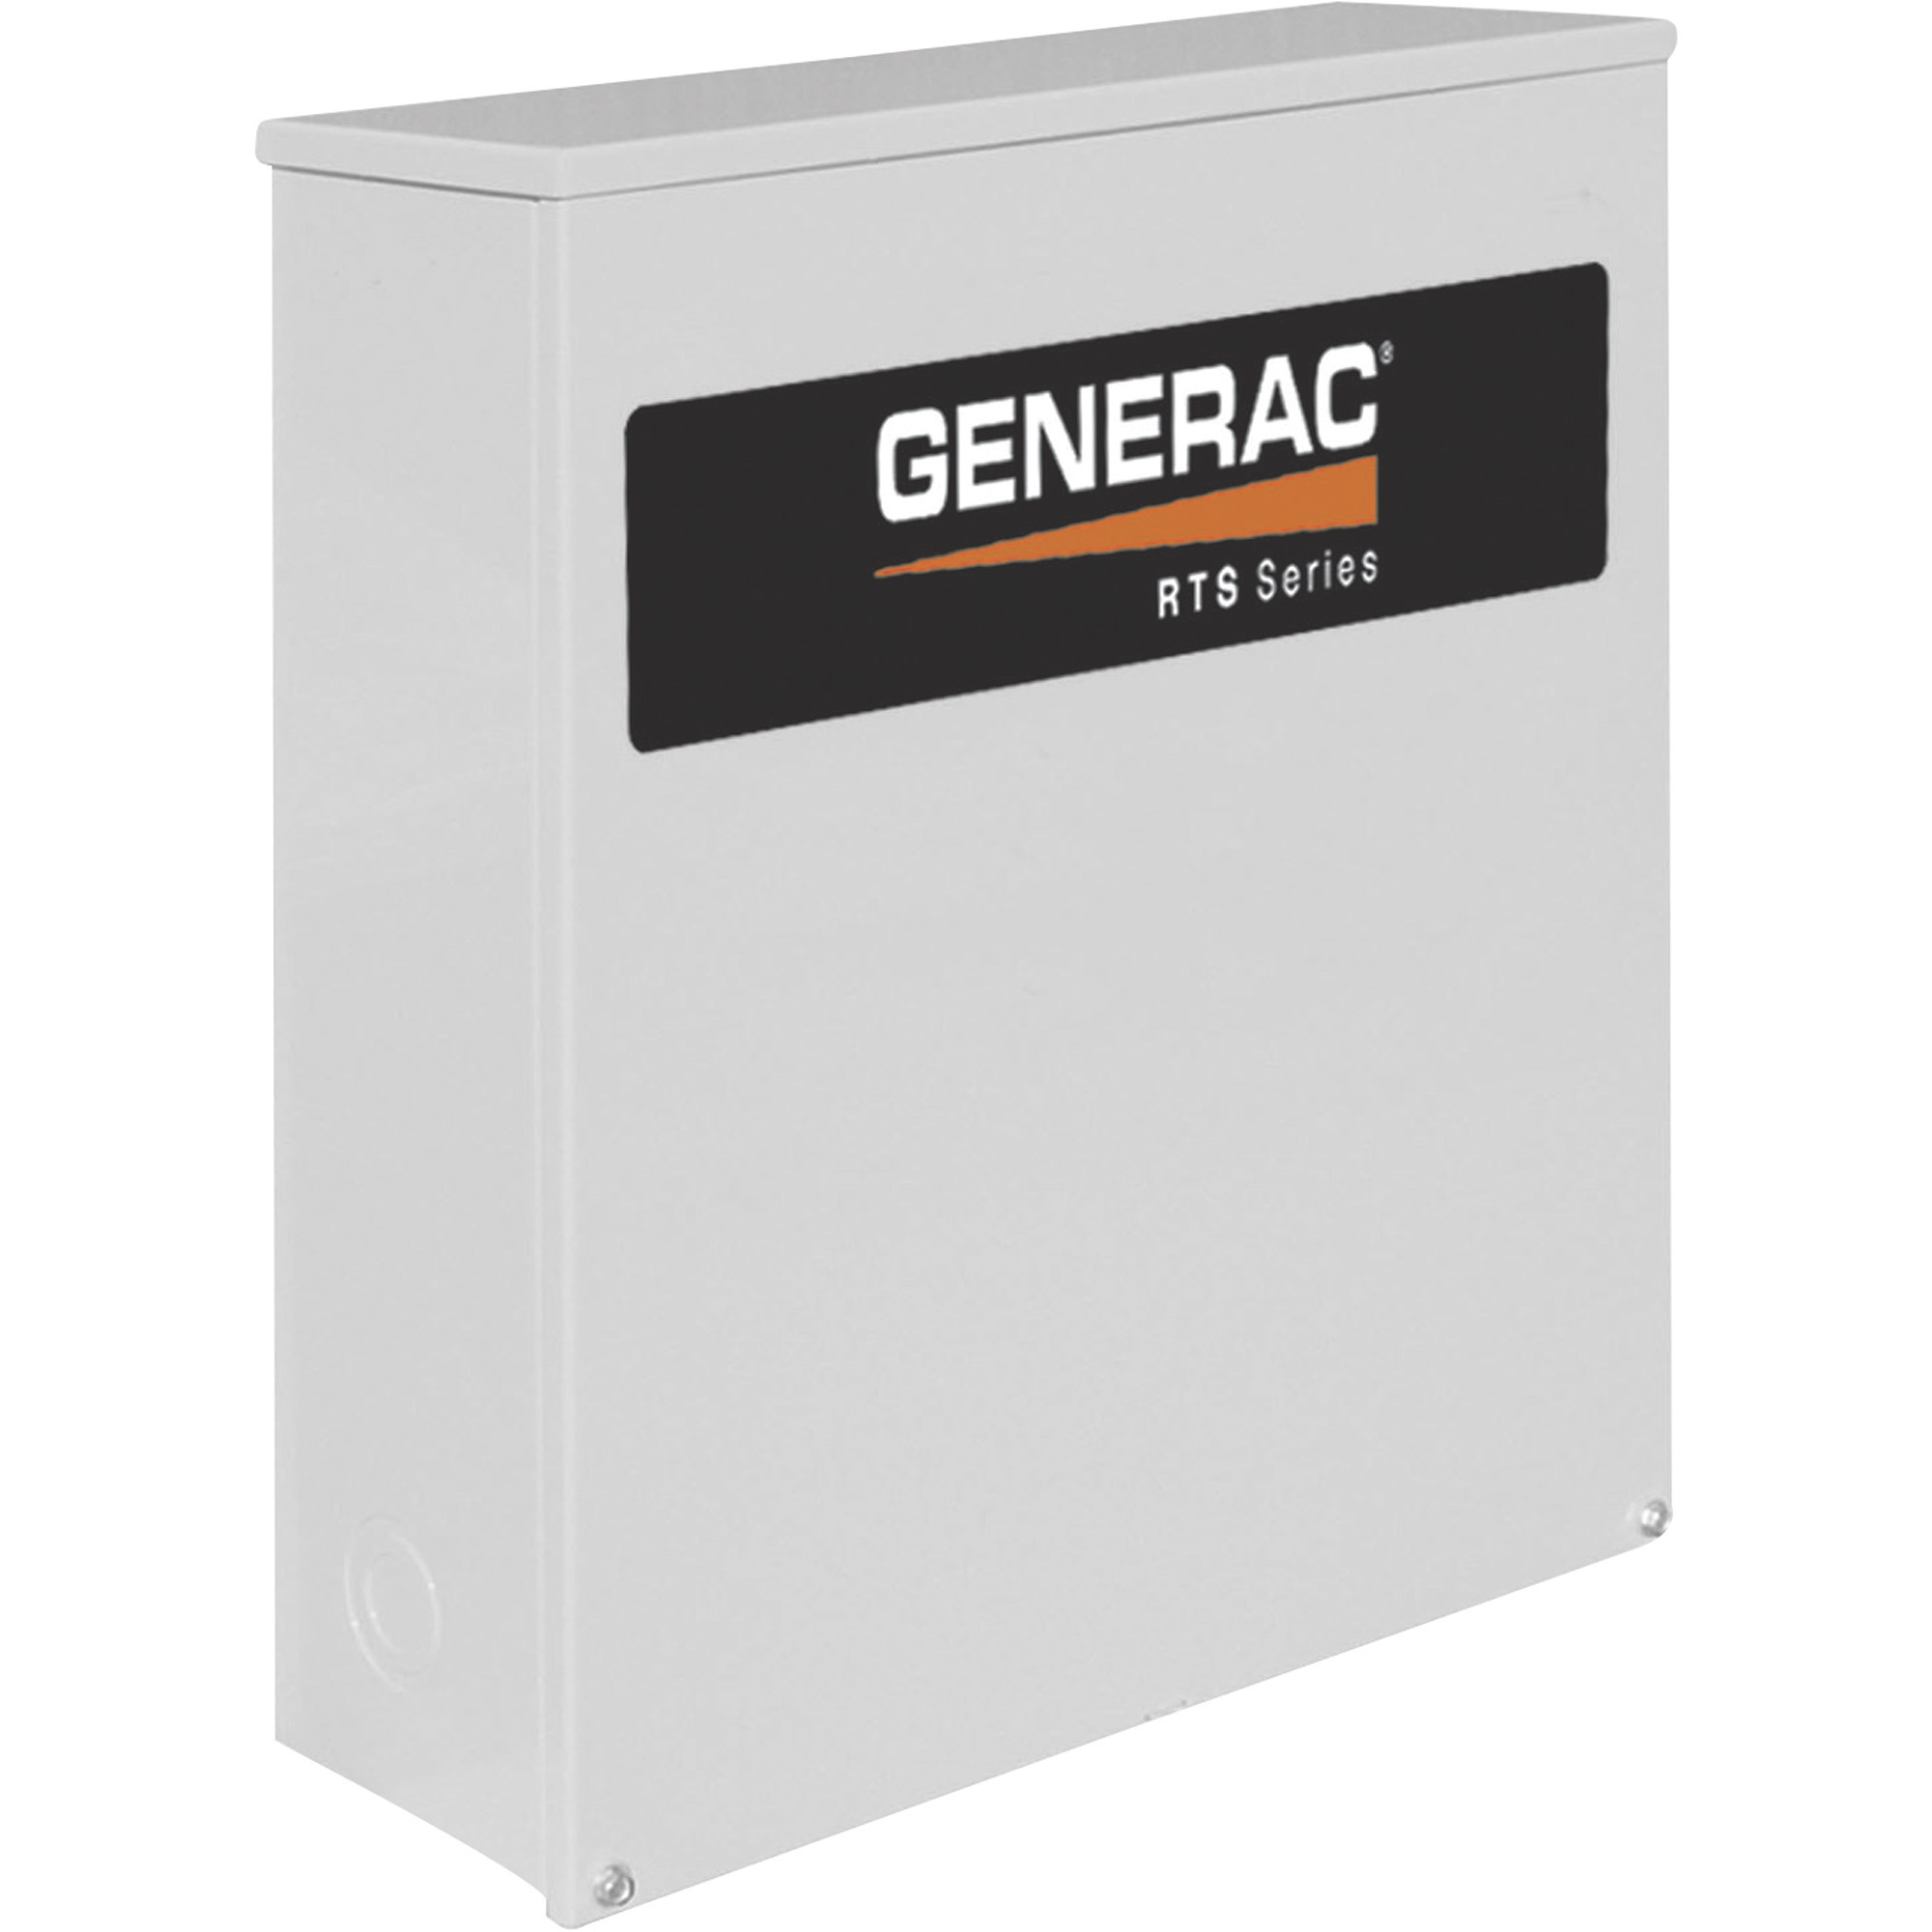 Generac RTS Automatic Generator Transfer Switch, 400 Amp, 120/240 Volts, 3 Phase, Type N, Model RTSN400J3